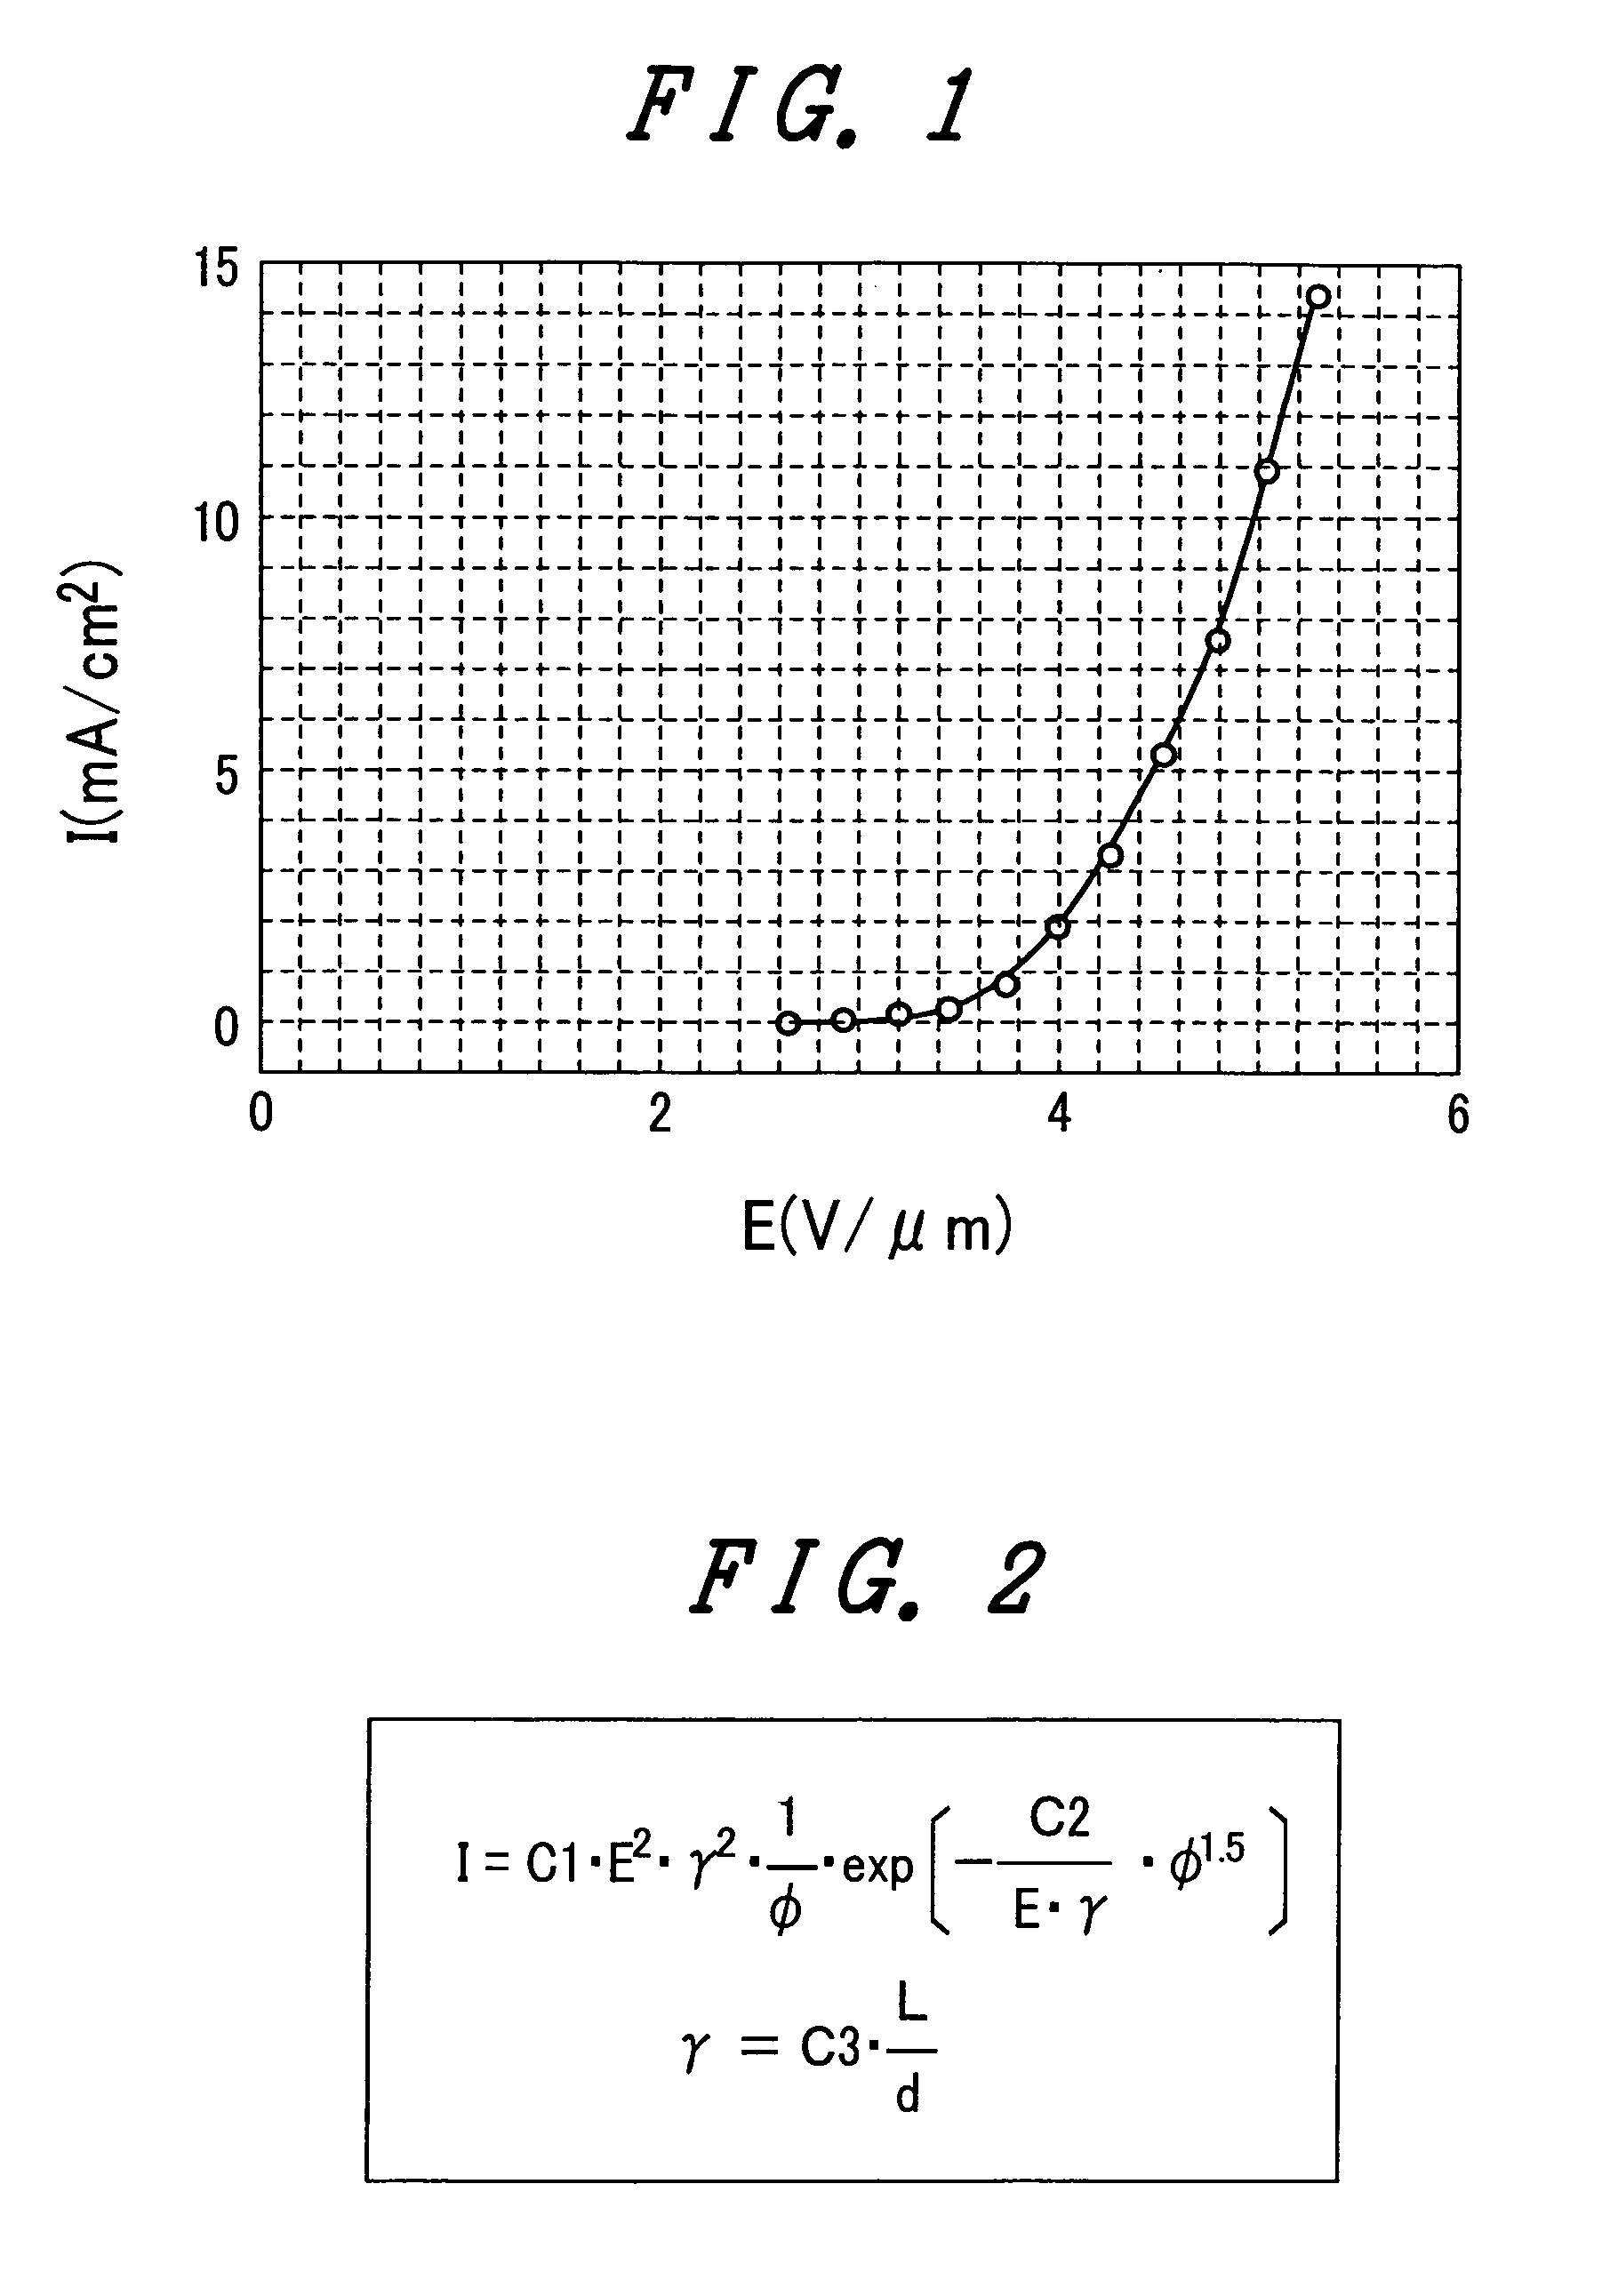 Emissive flat panel display having electron sources with high current density and low electric field strength